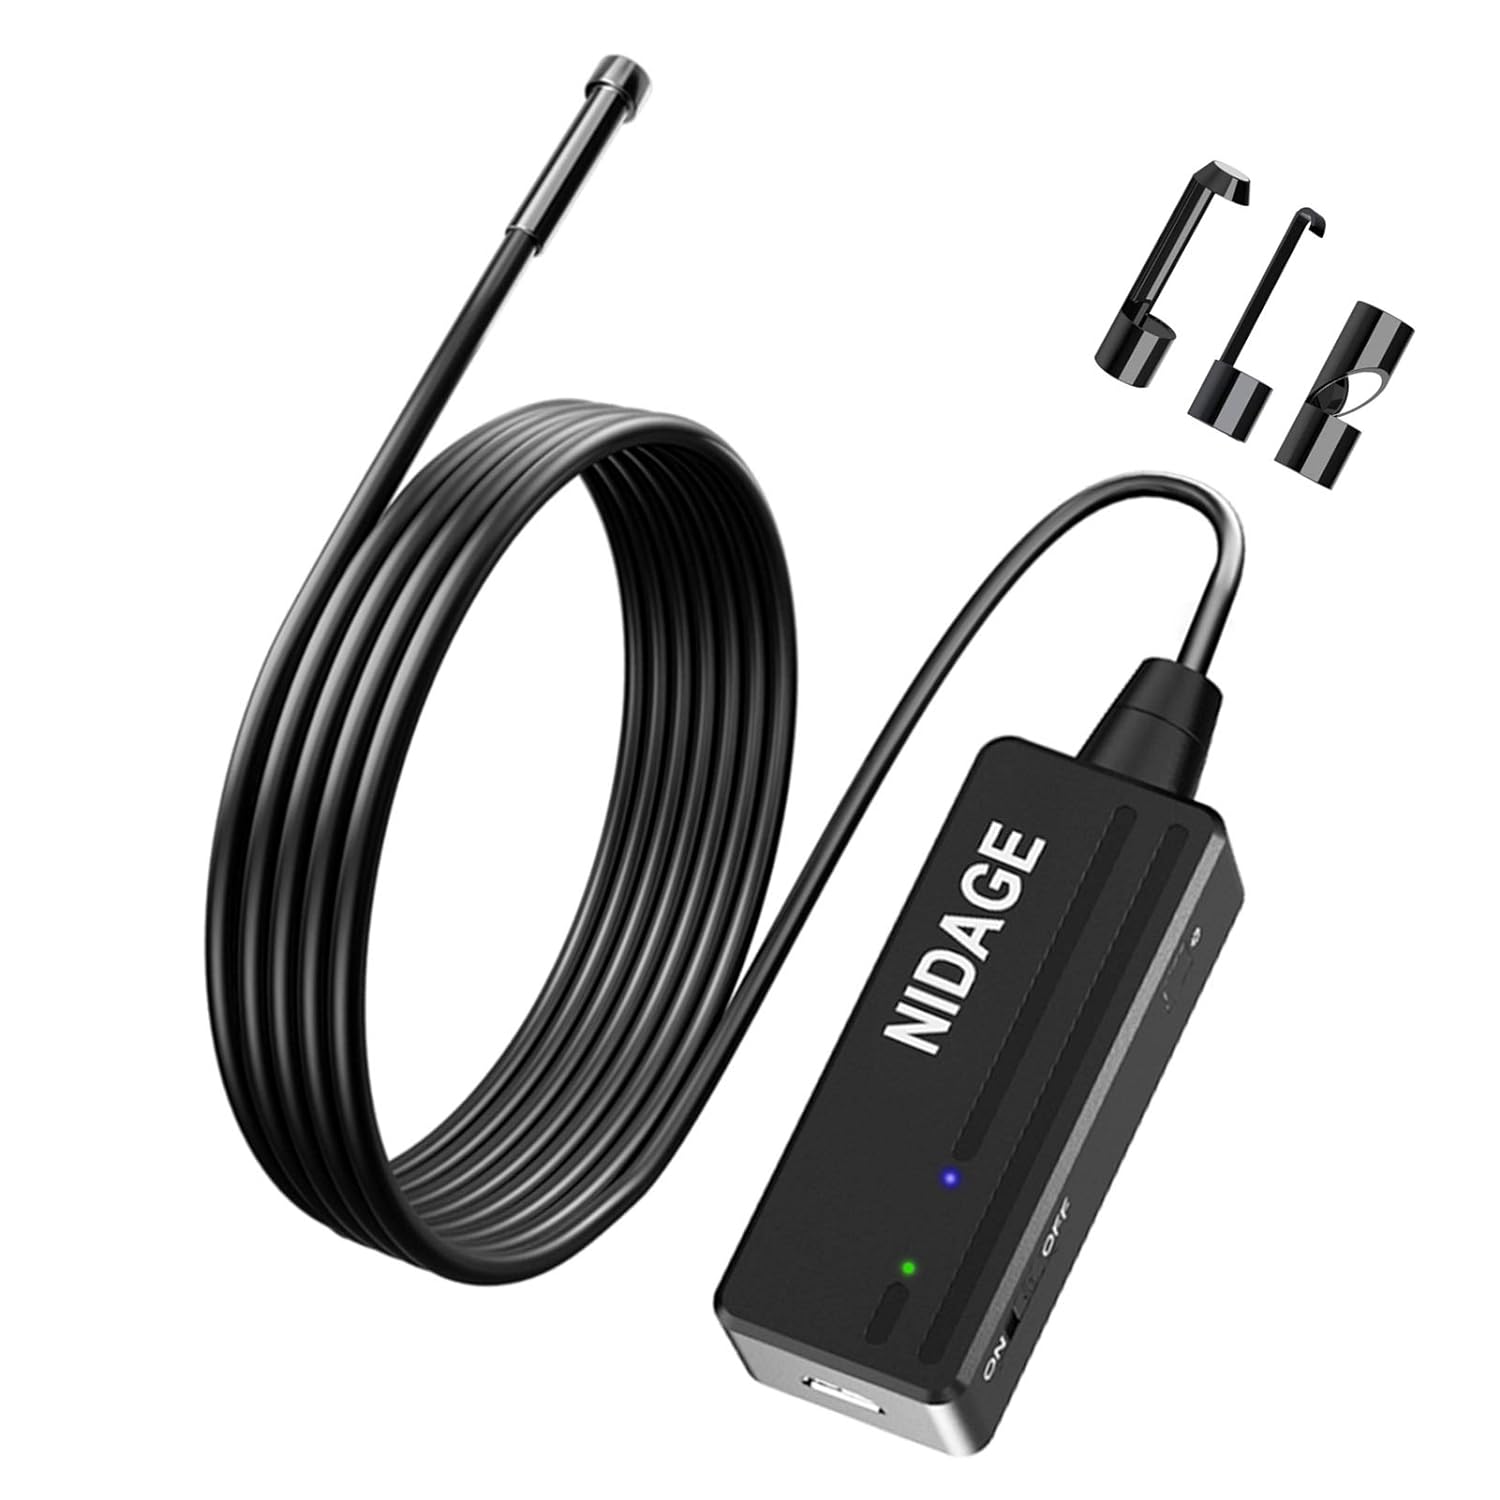 Best Endoscope Cameras For iPhone - iOS Hacker